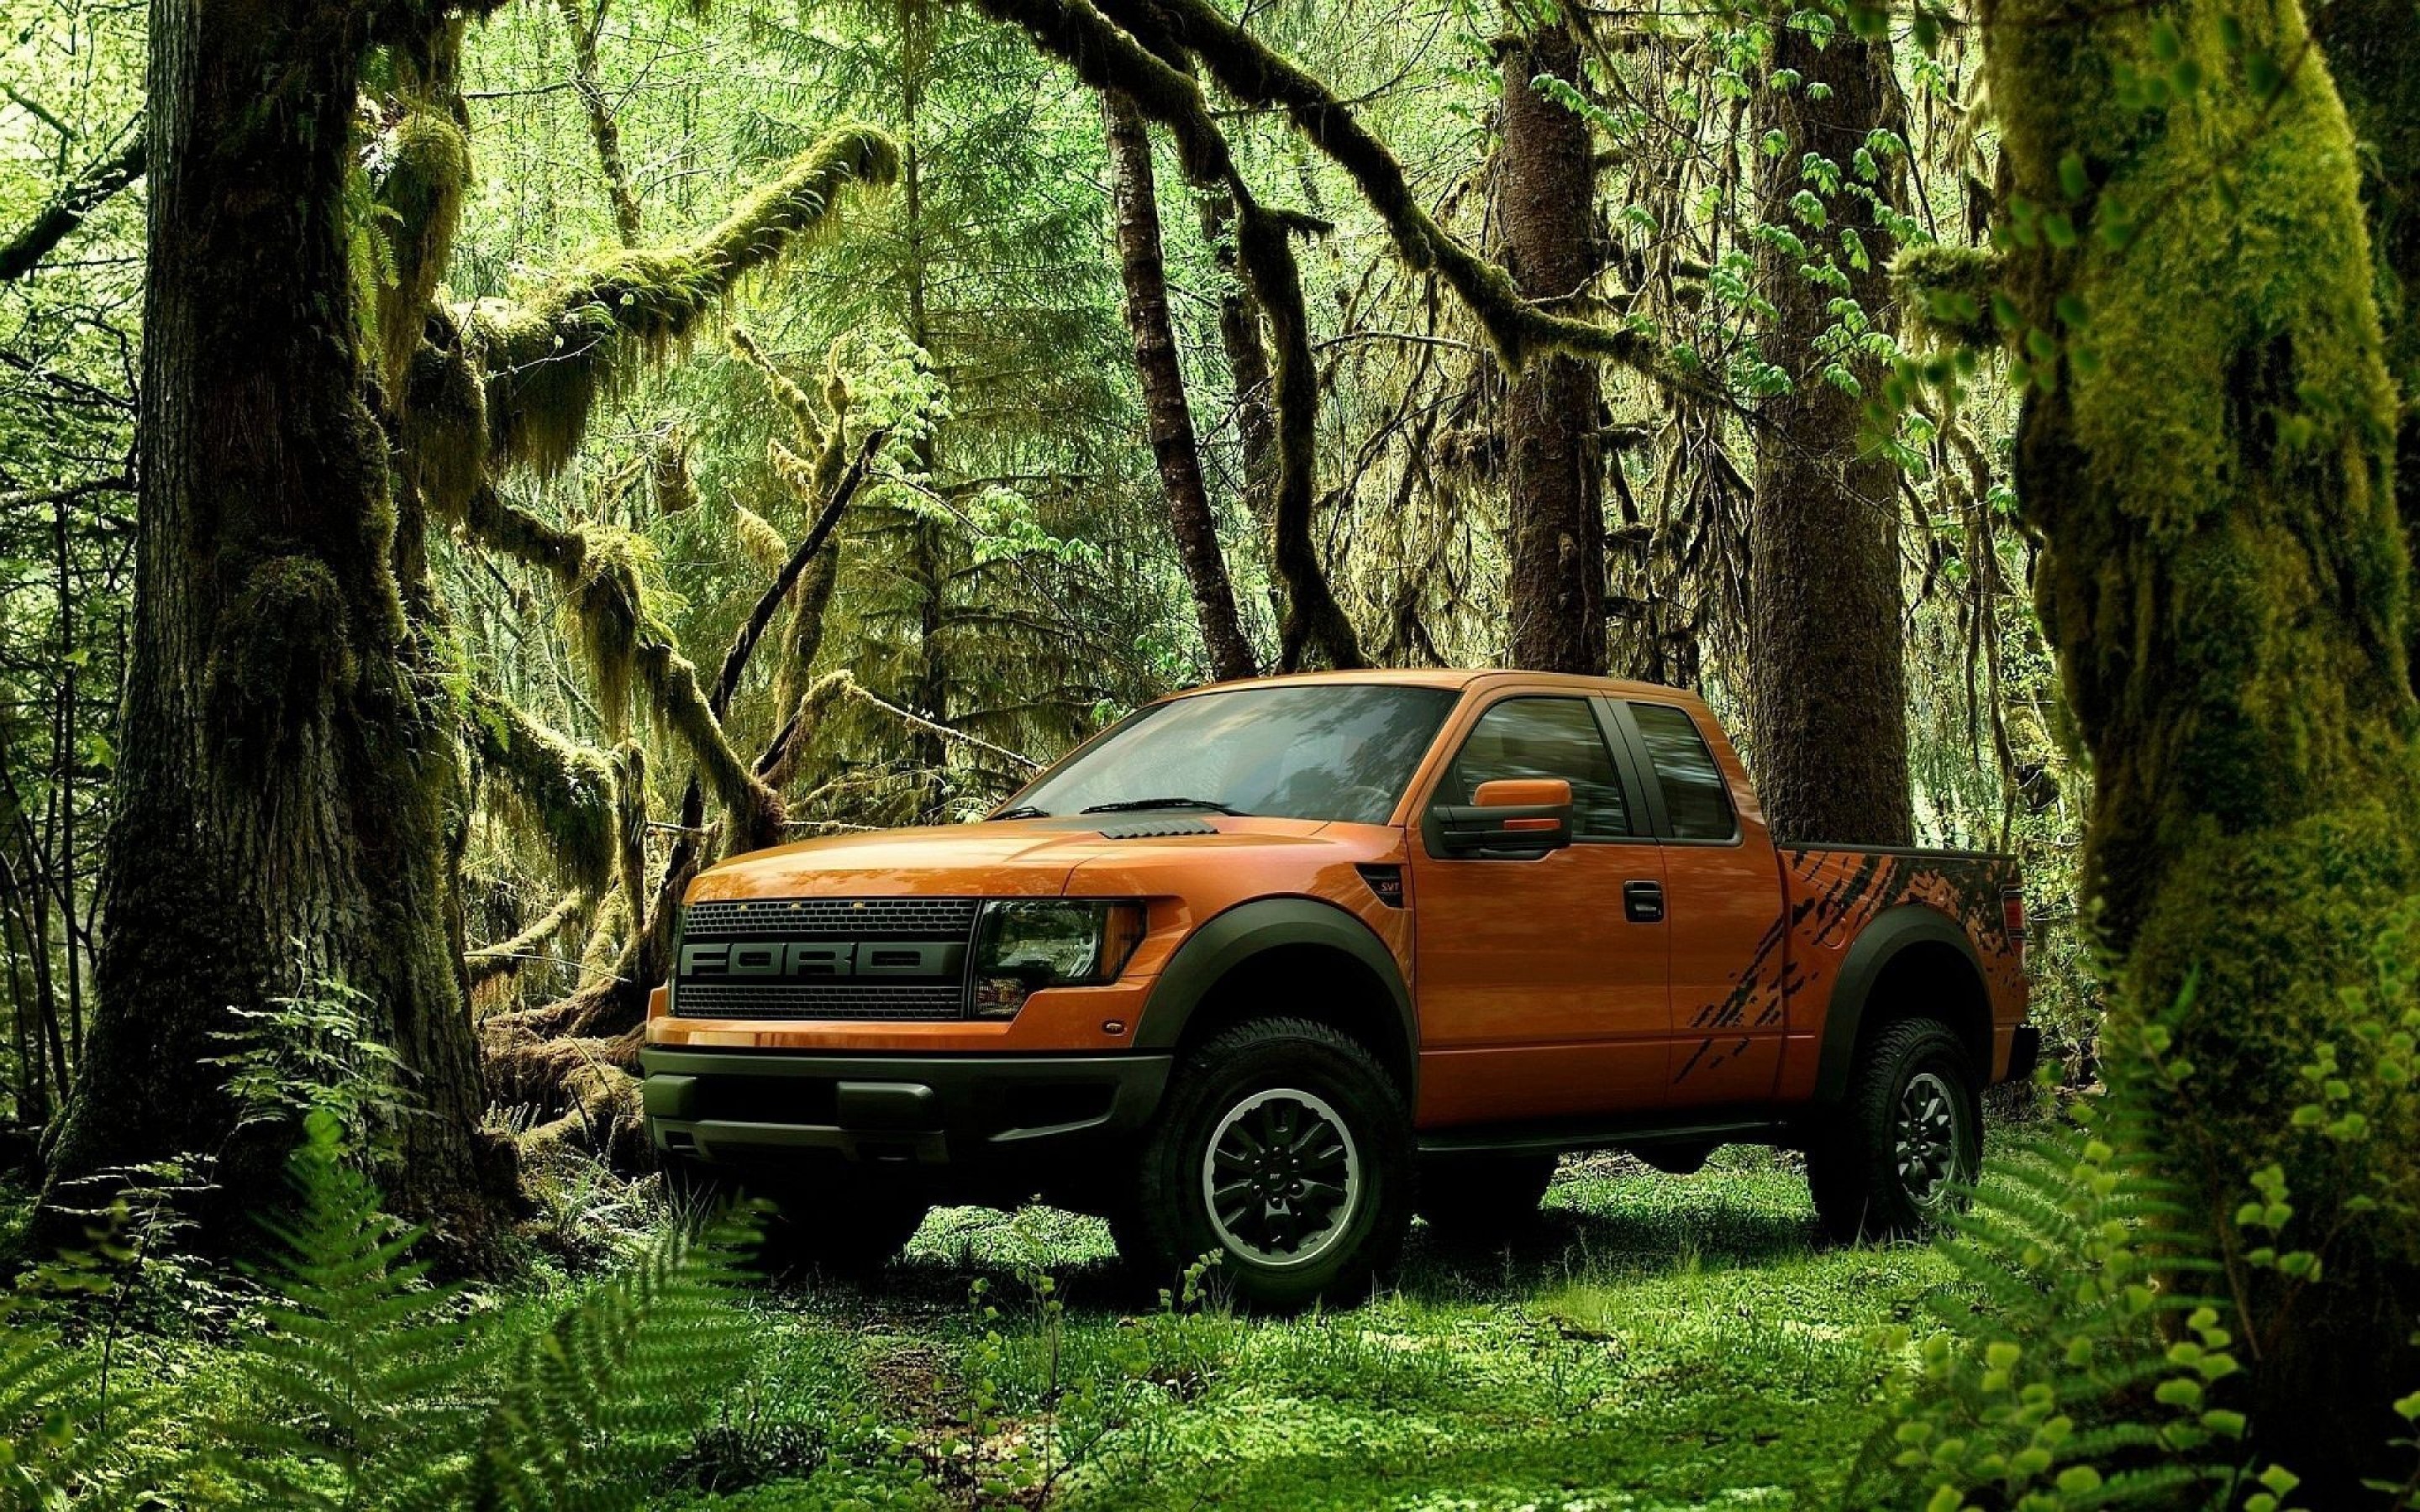 General 2880x1800 Ford Raptor Ford trees vehicle car orange cars forest outdoors pickup trucks American cars